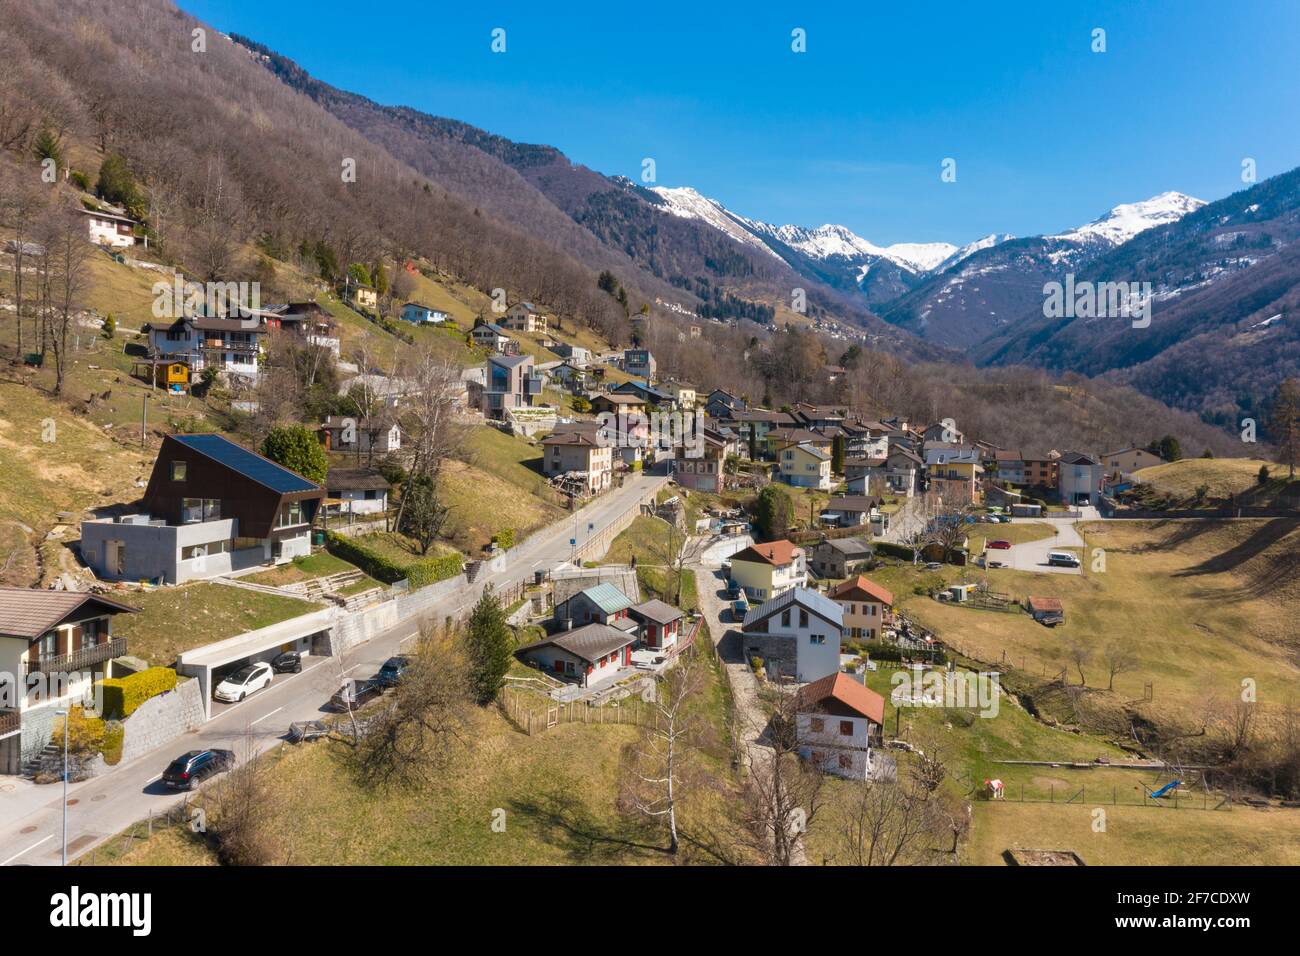 Aerial view of the Morobbia Valley, winter landscape on a sunny day with snow on the mountains. Blue sky. The place is in Canton Ticino, Switzerland. Stock Photo